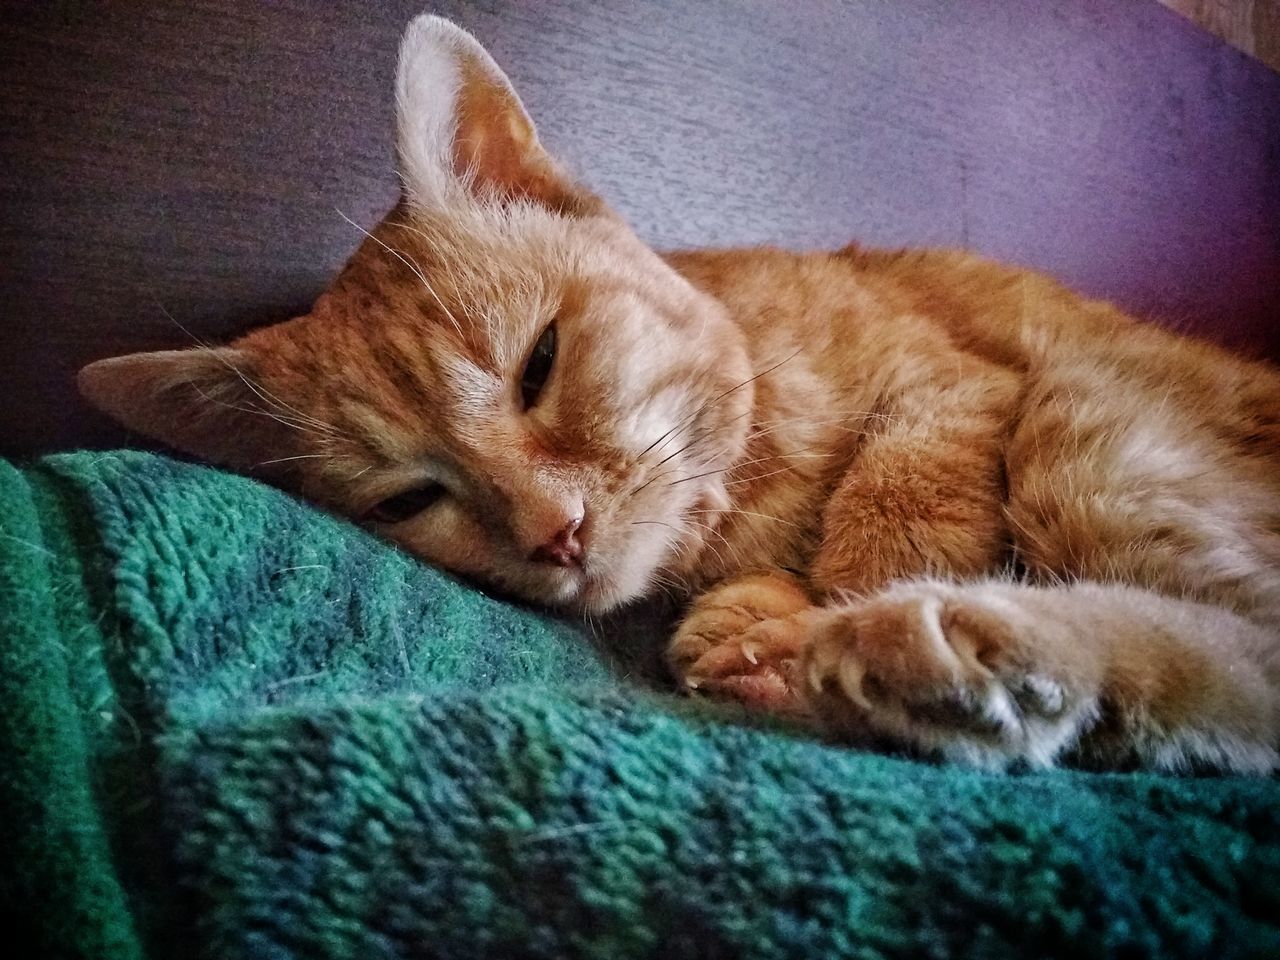 domestic, pets, cat, domestic cat, domestic animals, relaxation, feline, animal themes, animal, mammal, one animal, close-up, vertebrate, eyes closed, sleeping, resting, no people, indoors, furniture, lying down, ginger cat, whisker, tabby, napping